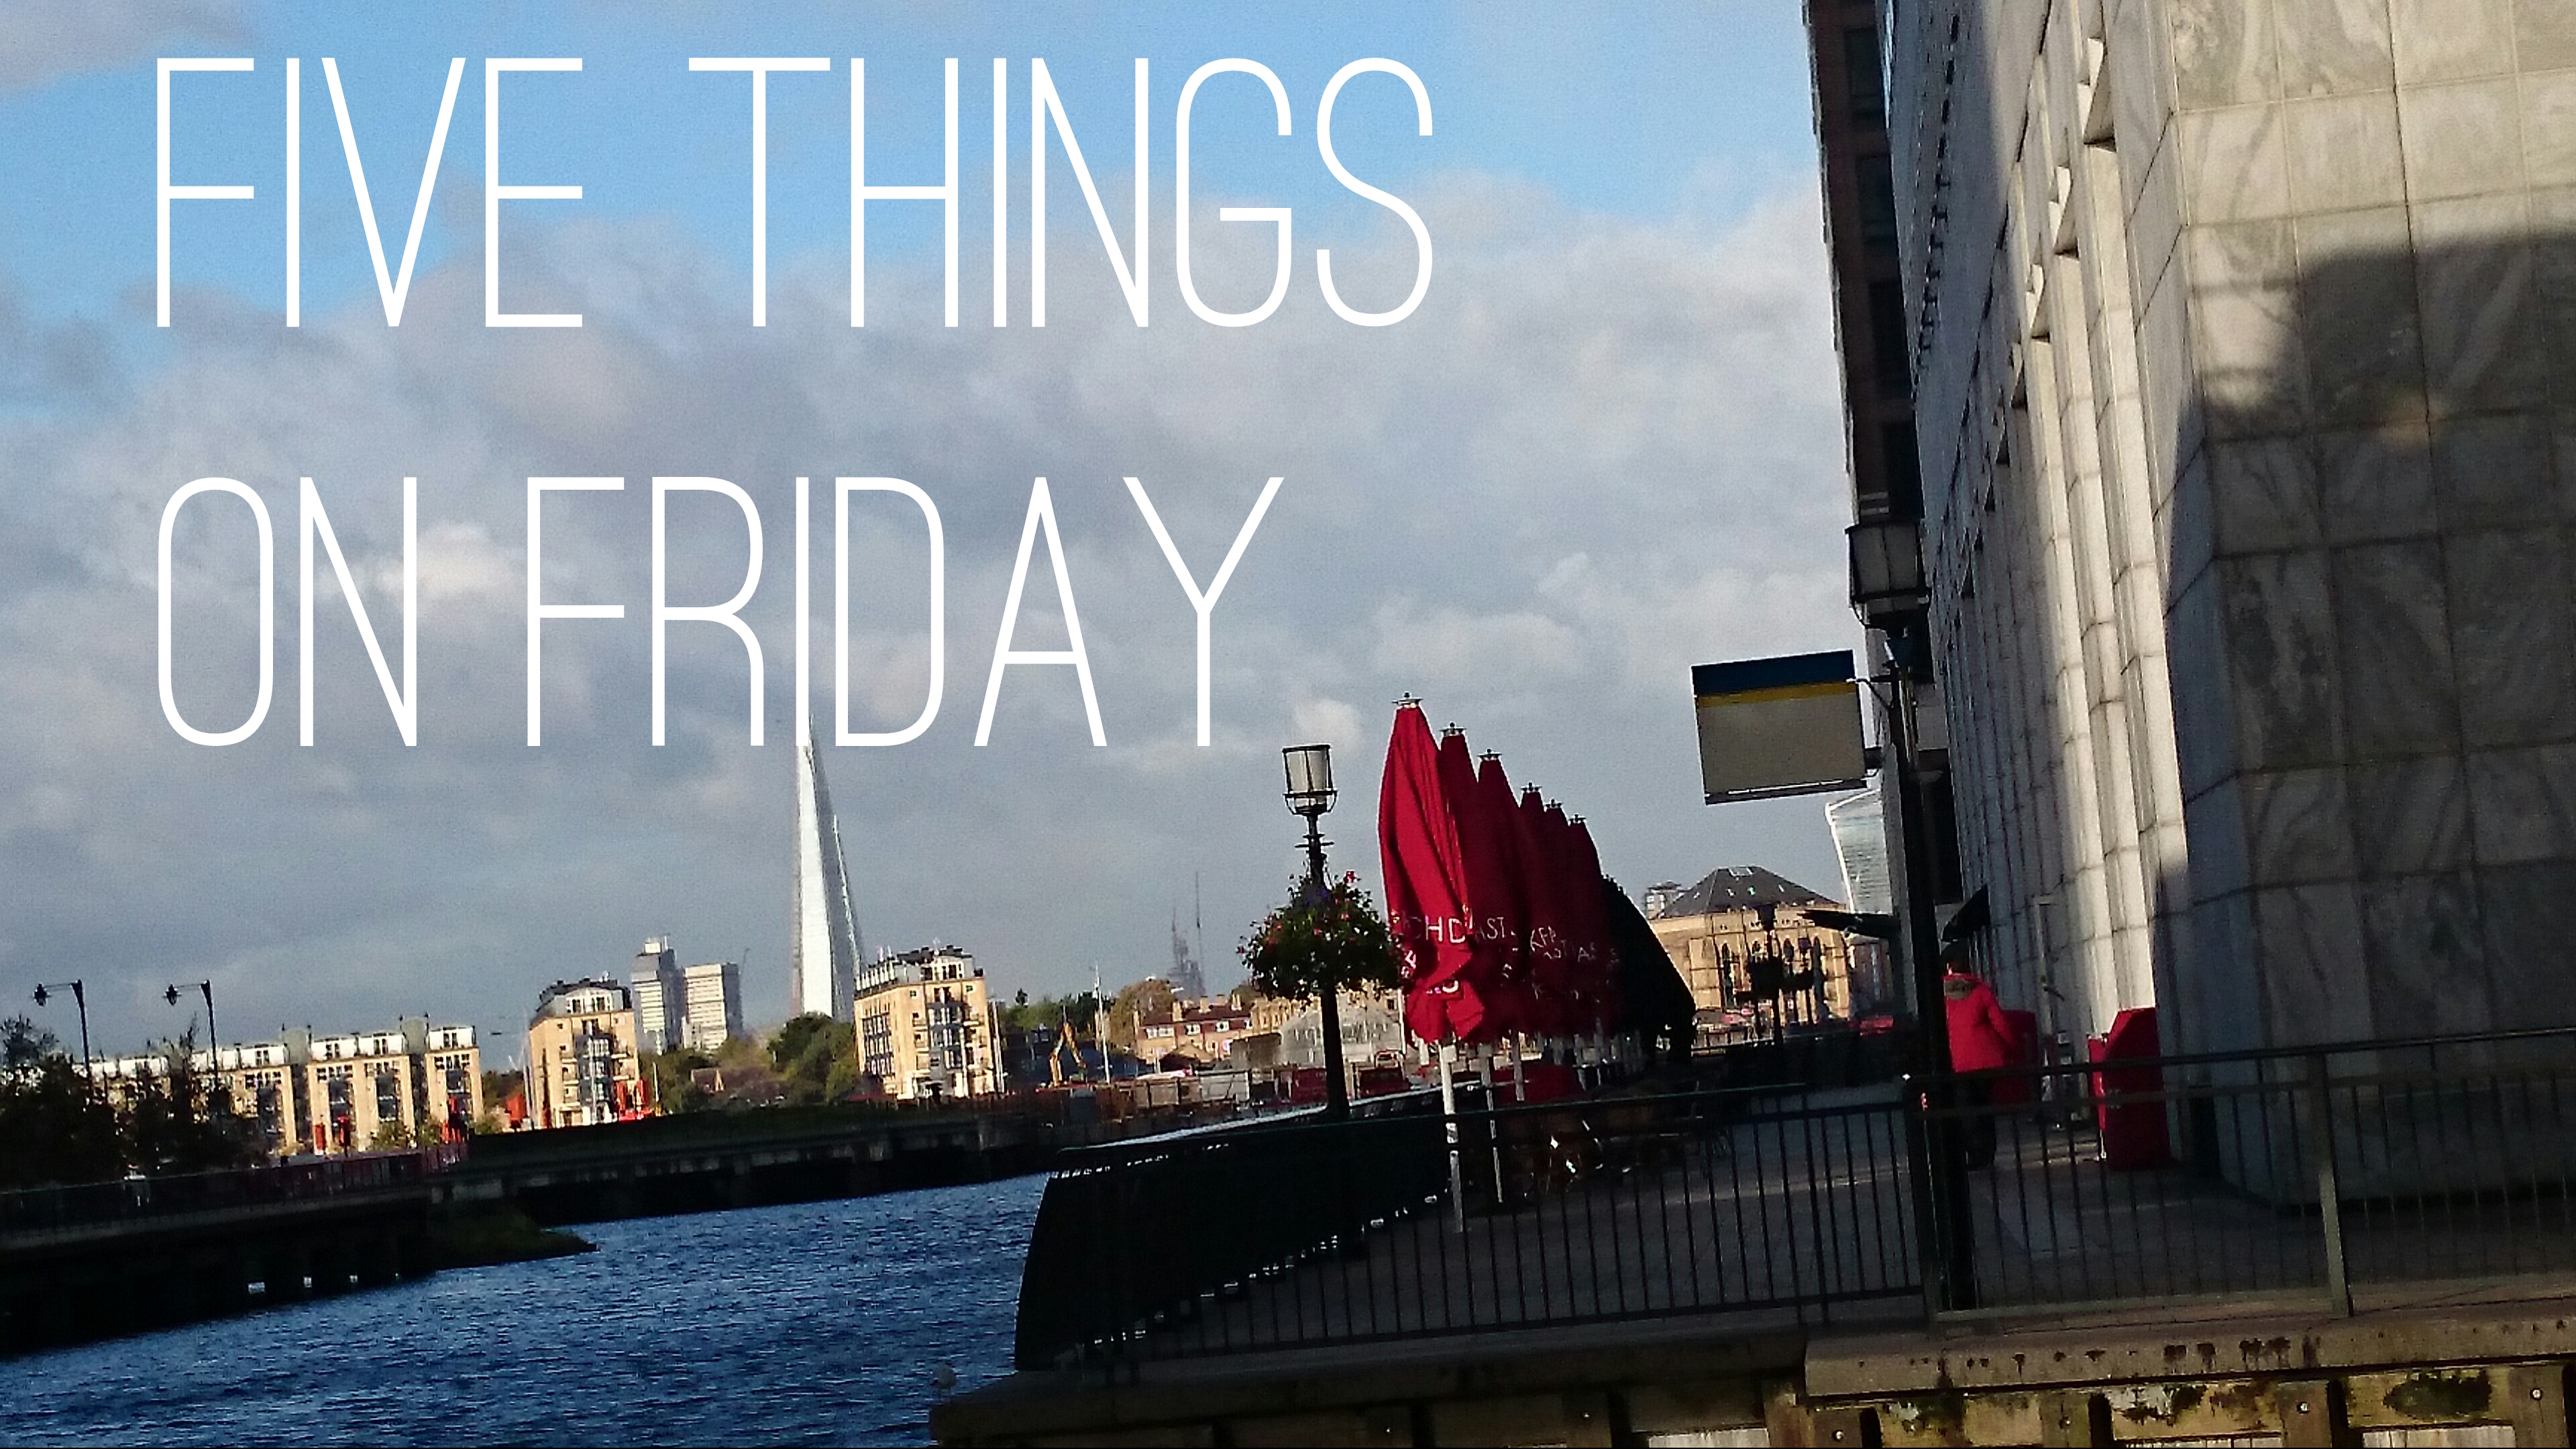 Five things on Friday #95